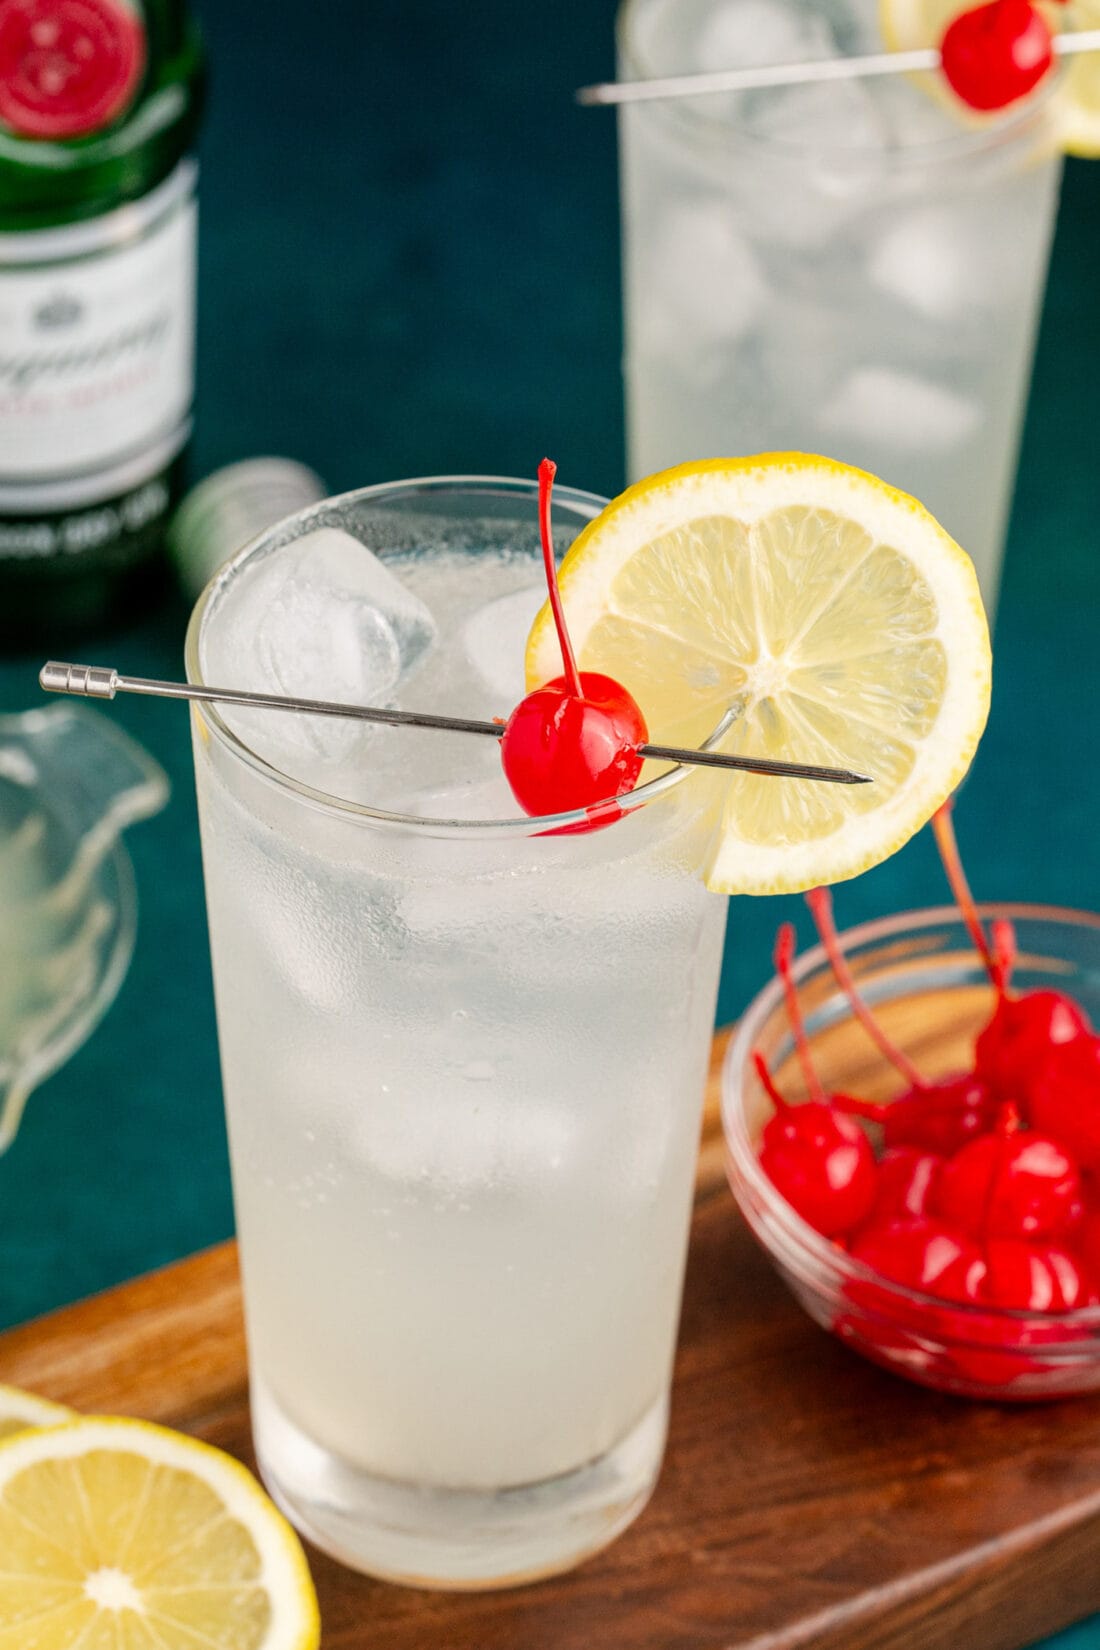 Close up photo of a Tom Collins cocktail garnished with a cherry and lemon wheel